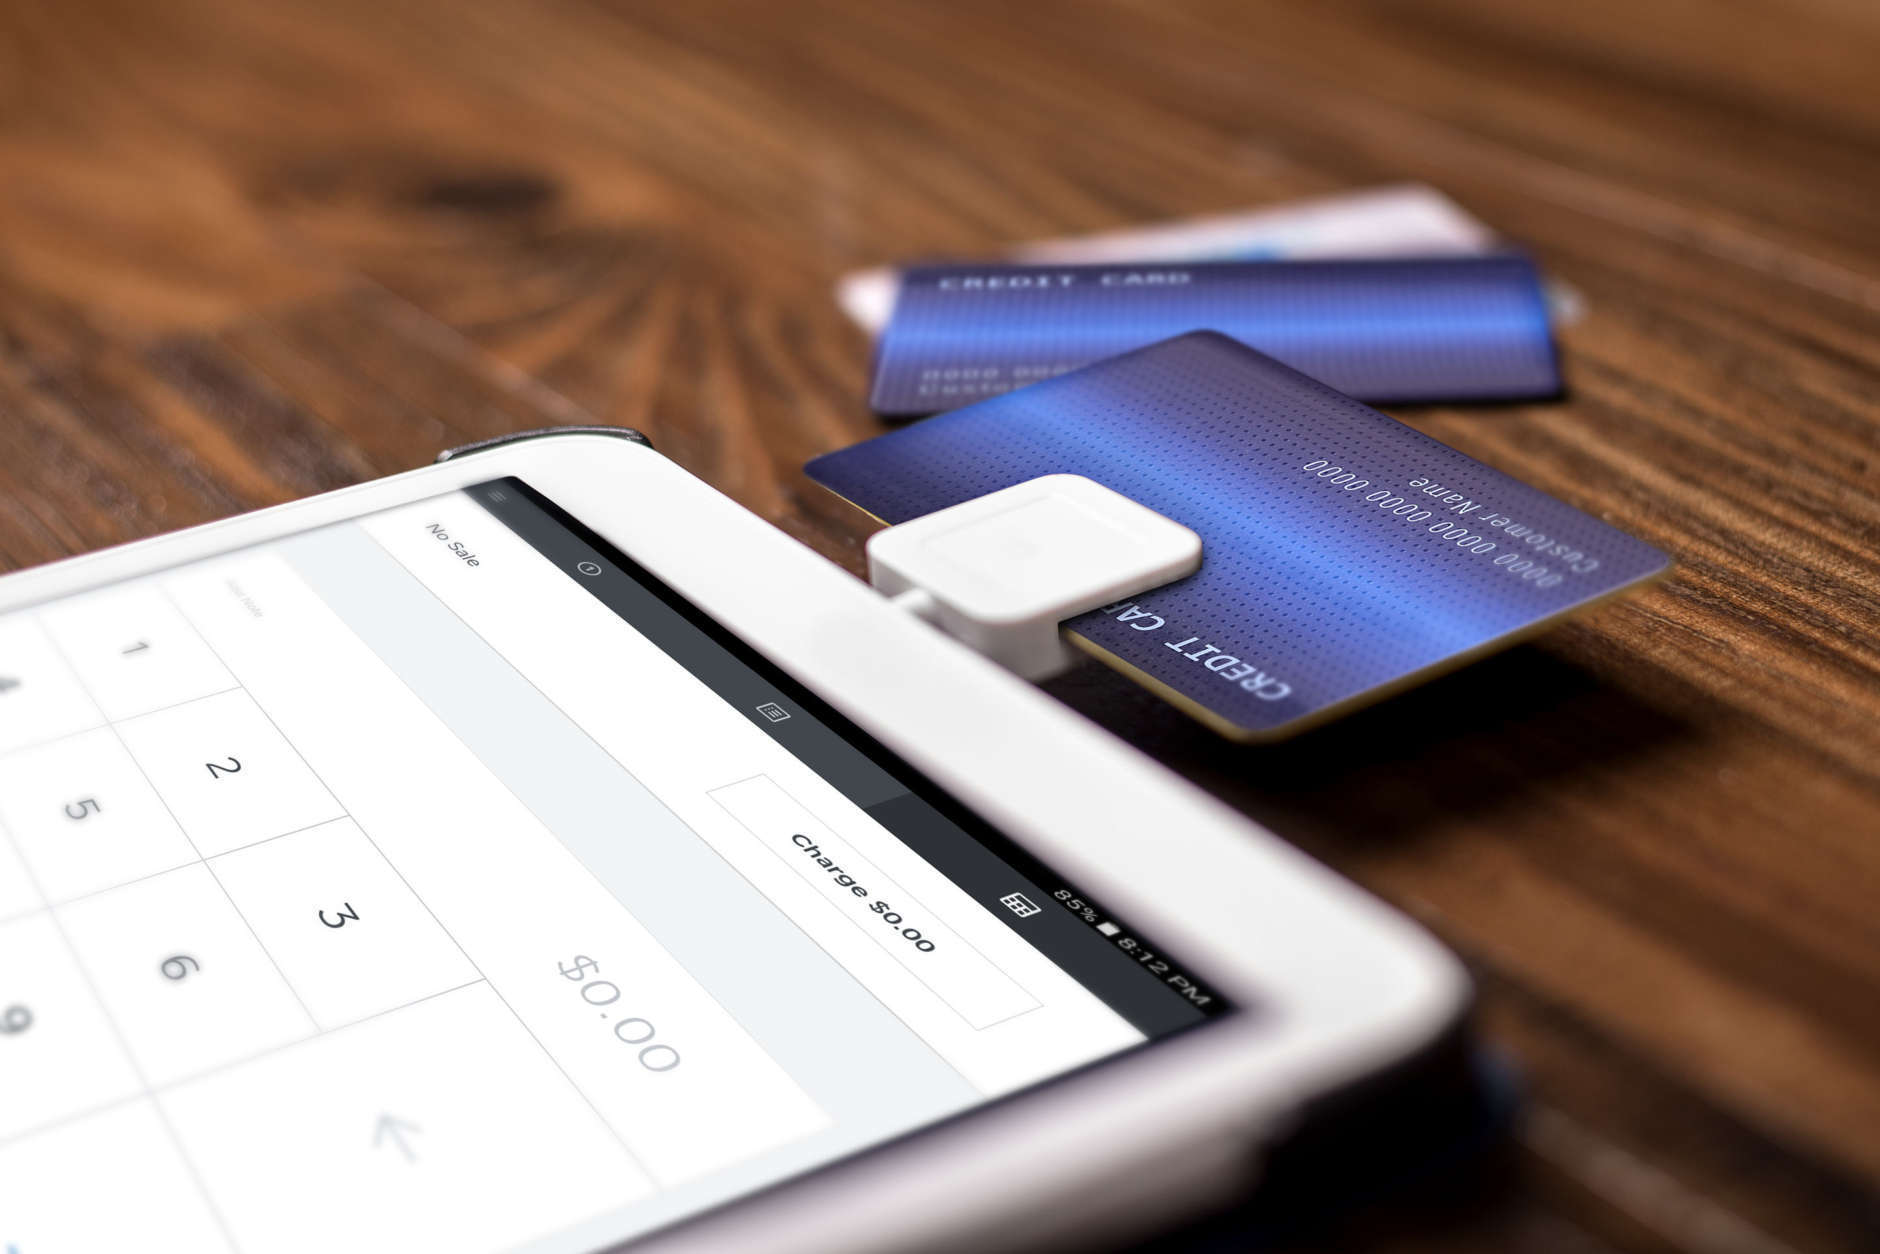 Credit card payment on a swipe or chip reader app on a tablet used by small or online businesses.  The electronic device is used as a modern cash register or for banking.  The image depics modern method of currency transactions for business.